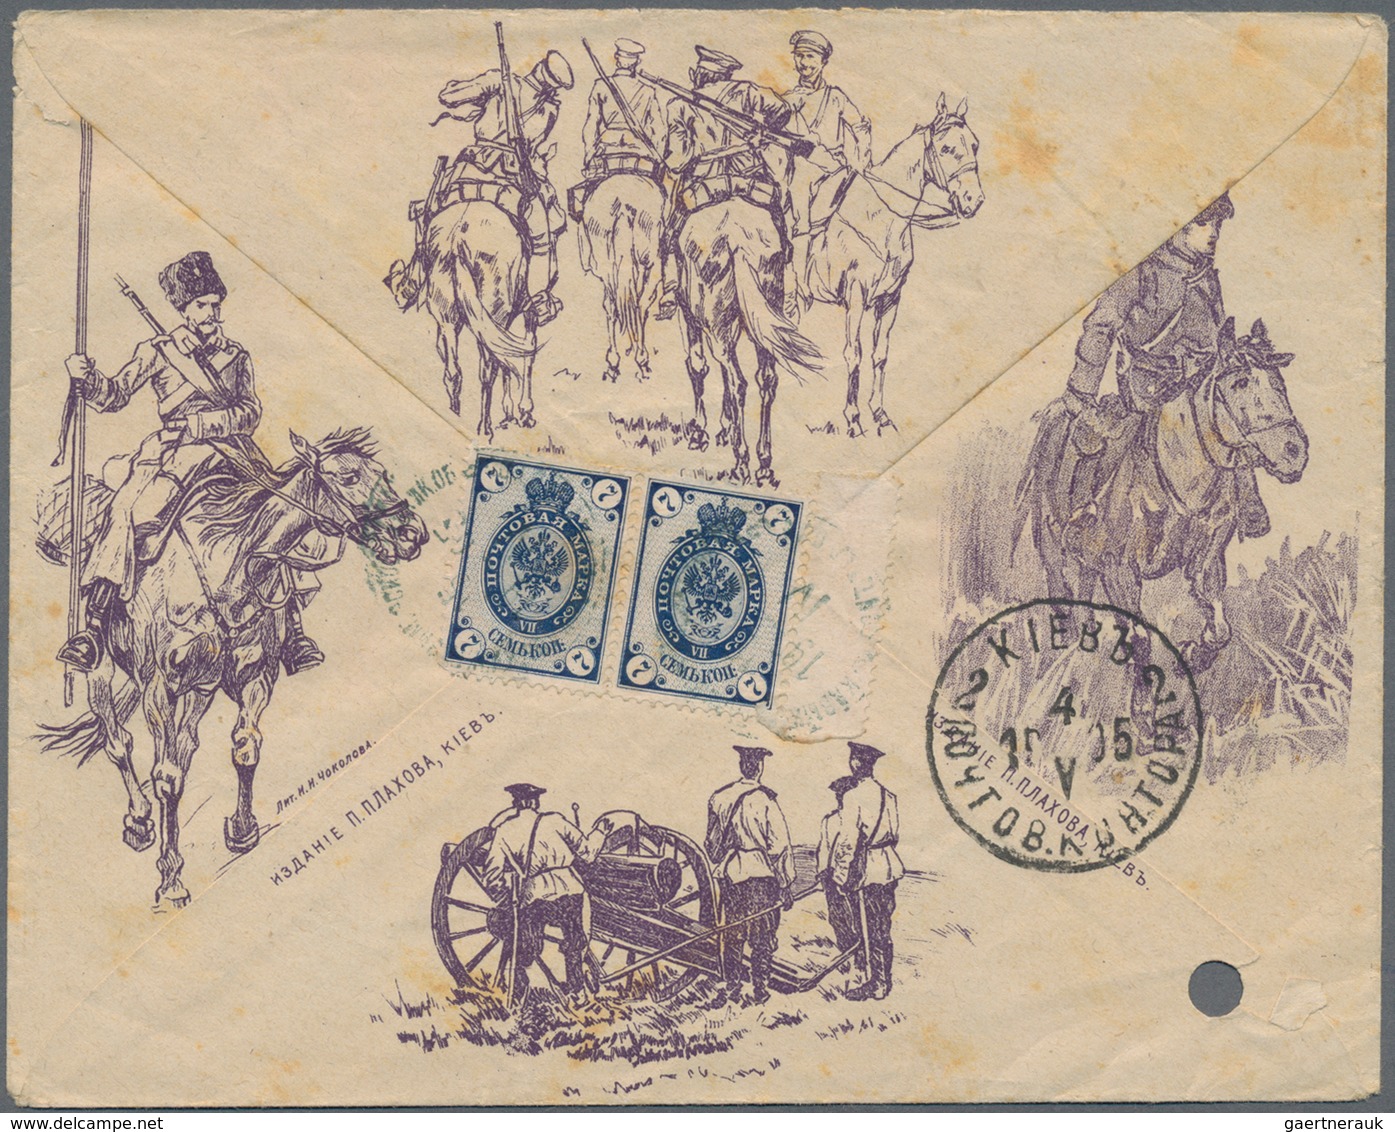 Russische Post In China: 1905, Russo-Japanese War, Picture Military Envelope Sent By Registered Mail - China